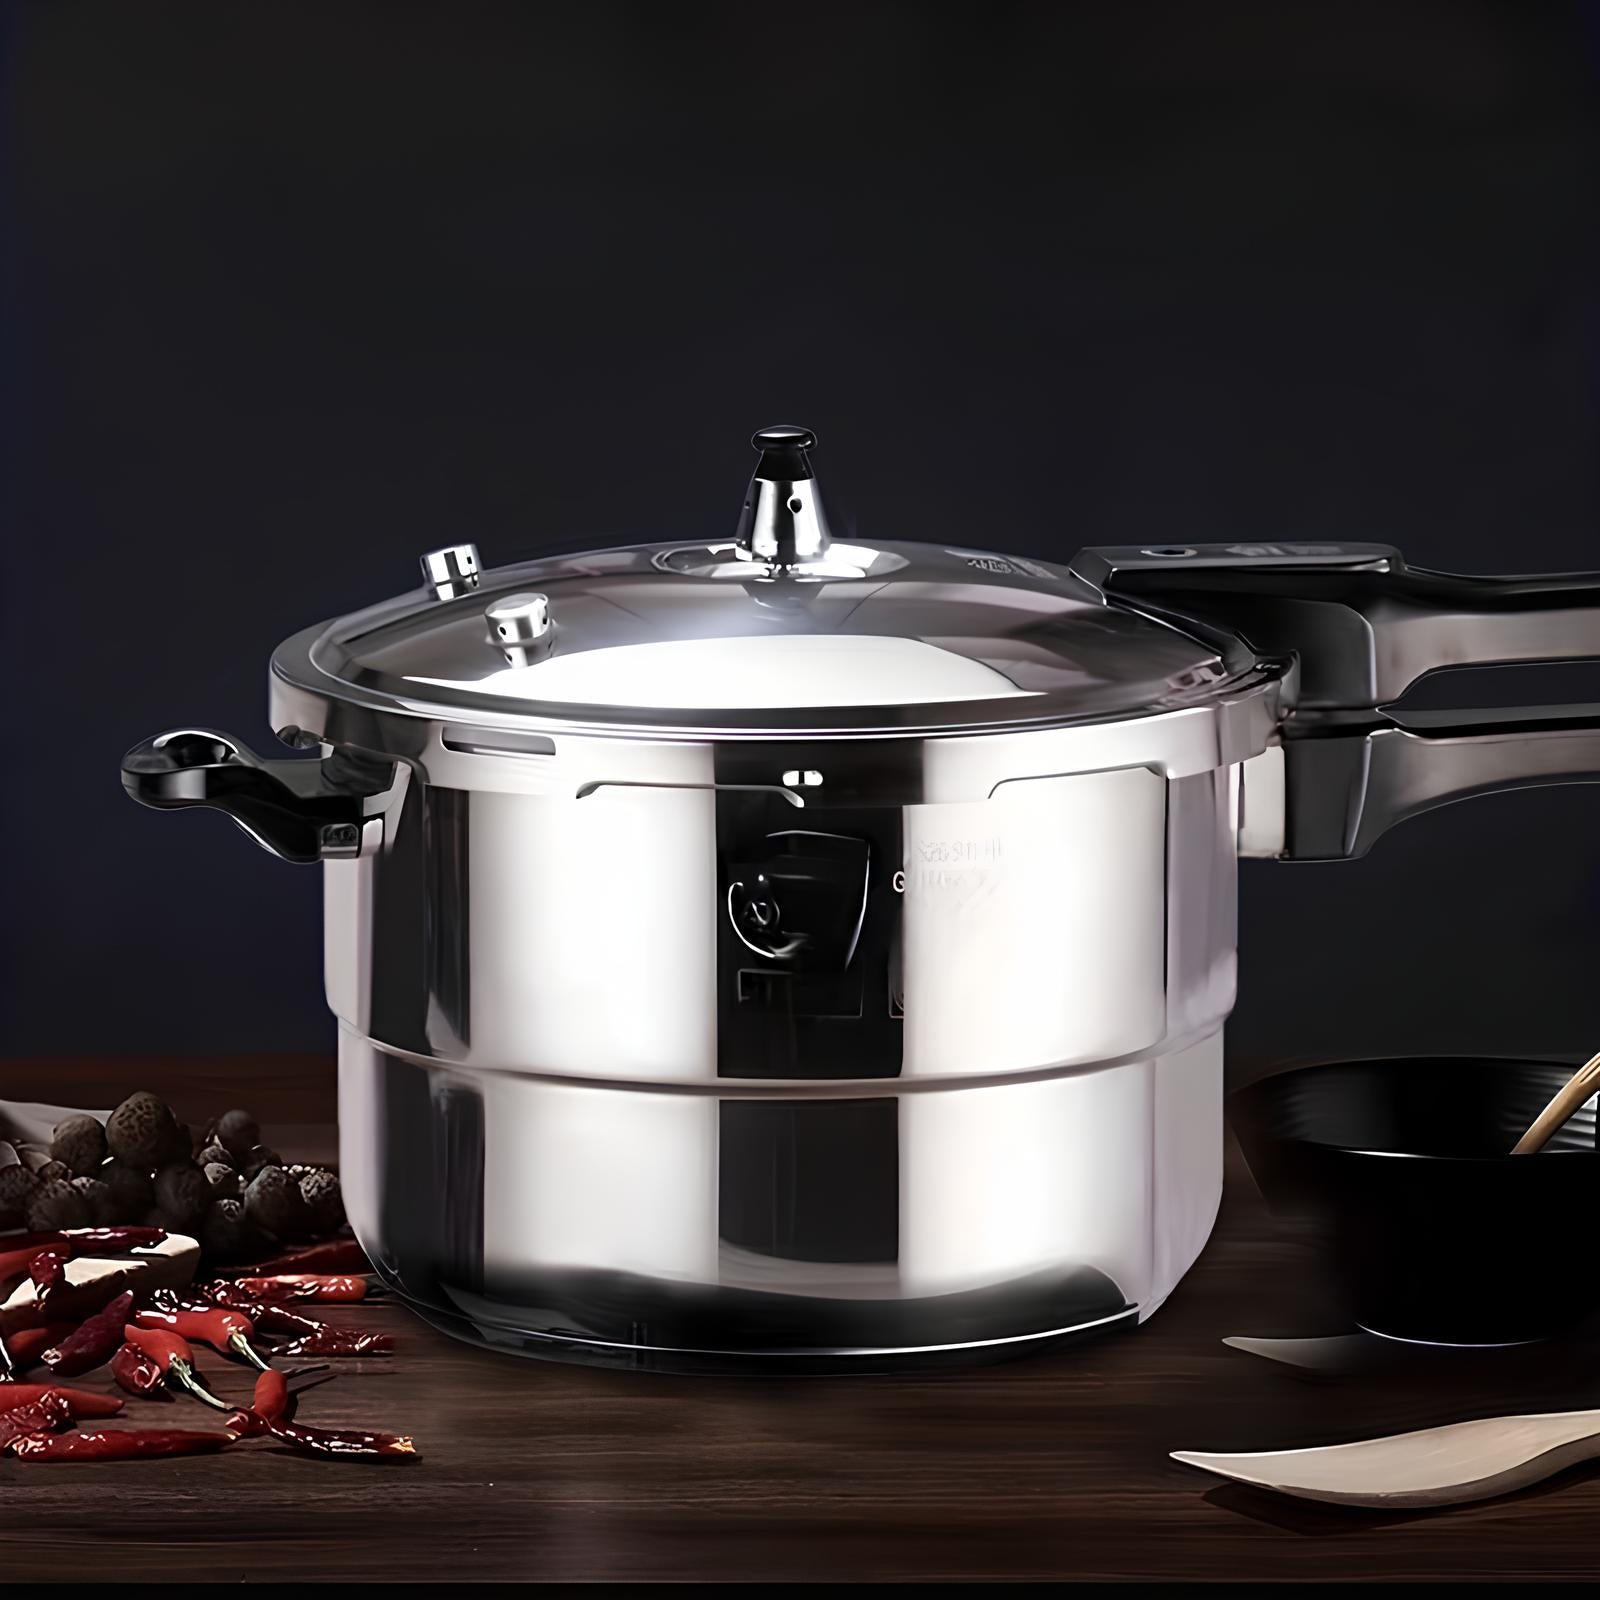 Cocotte-minute pour cuisson optimale - UstensilesCulinaires